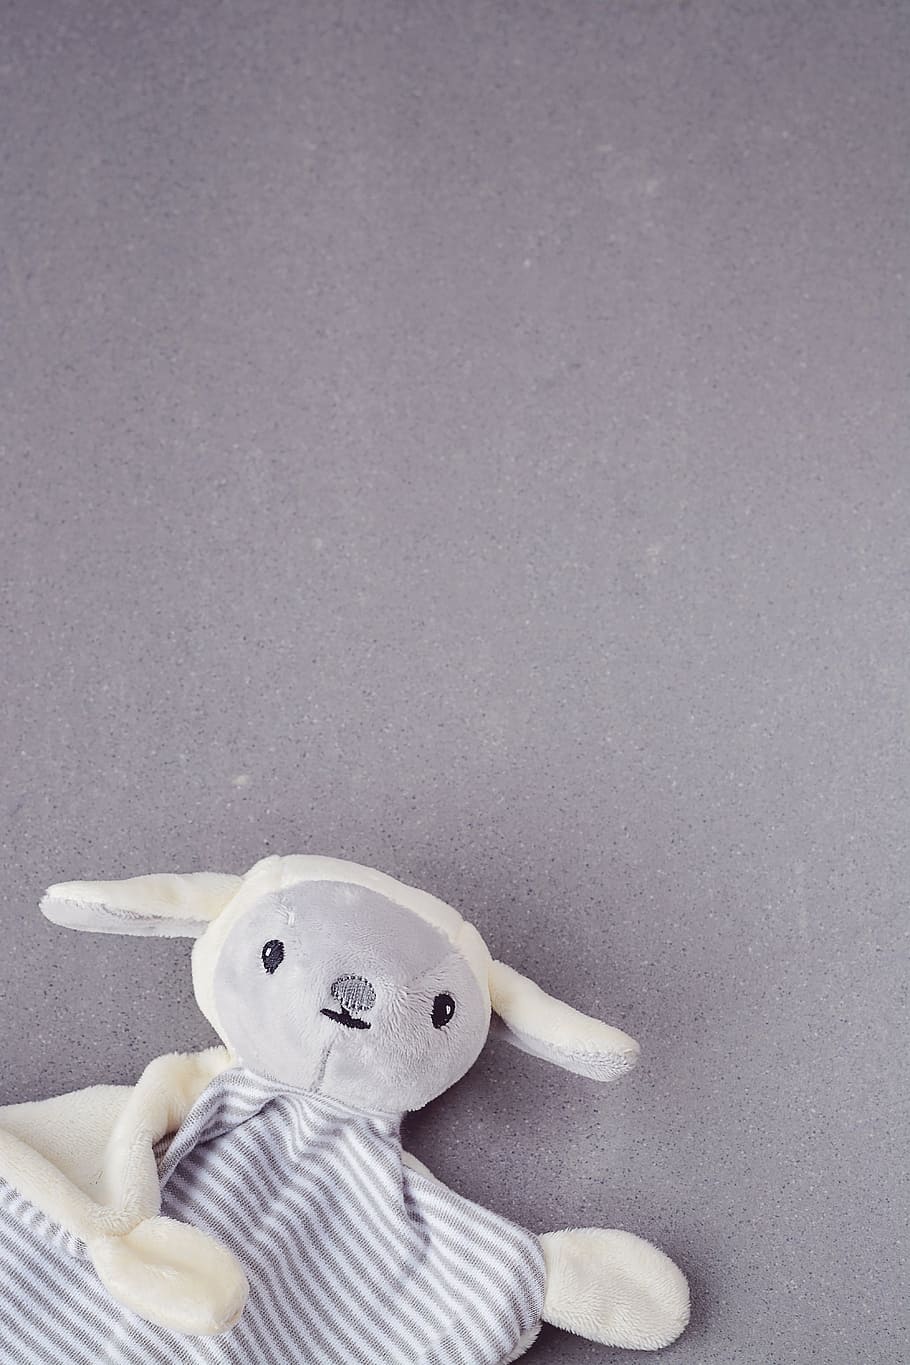 toys, doudou, security blanket, grey, close, fabric, text dom, negative space, toy, childhood